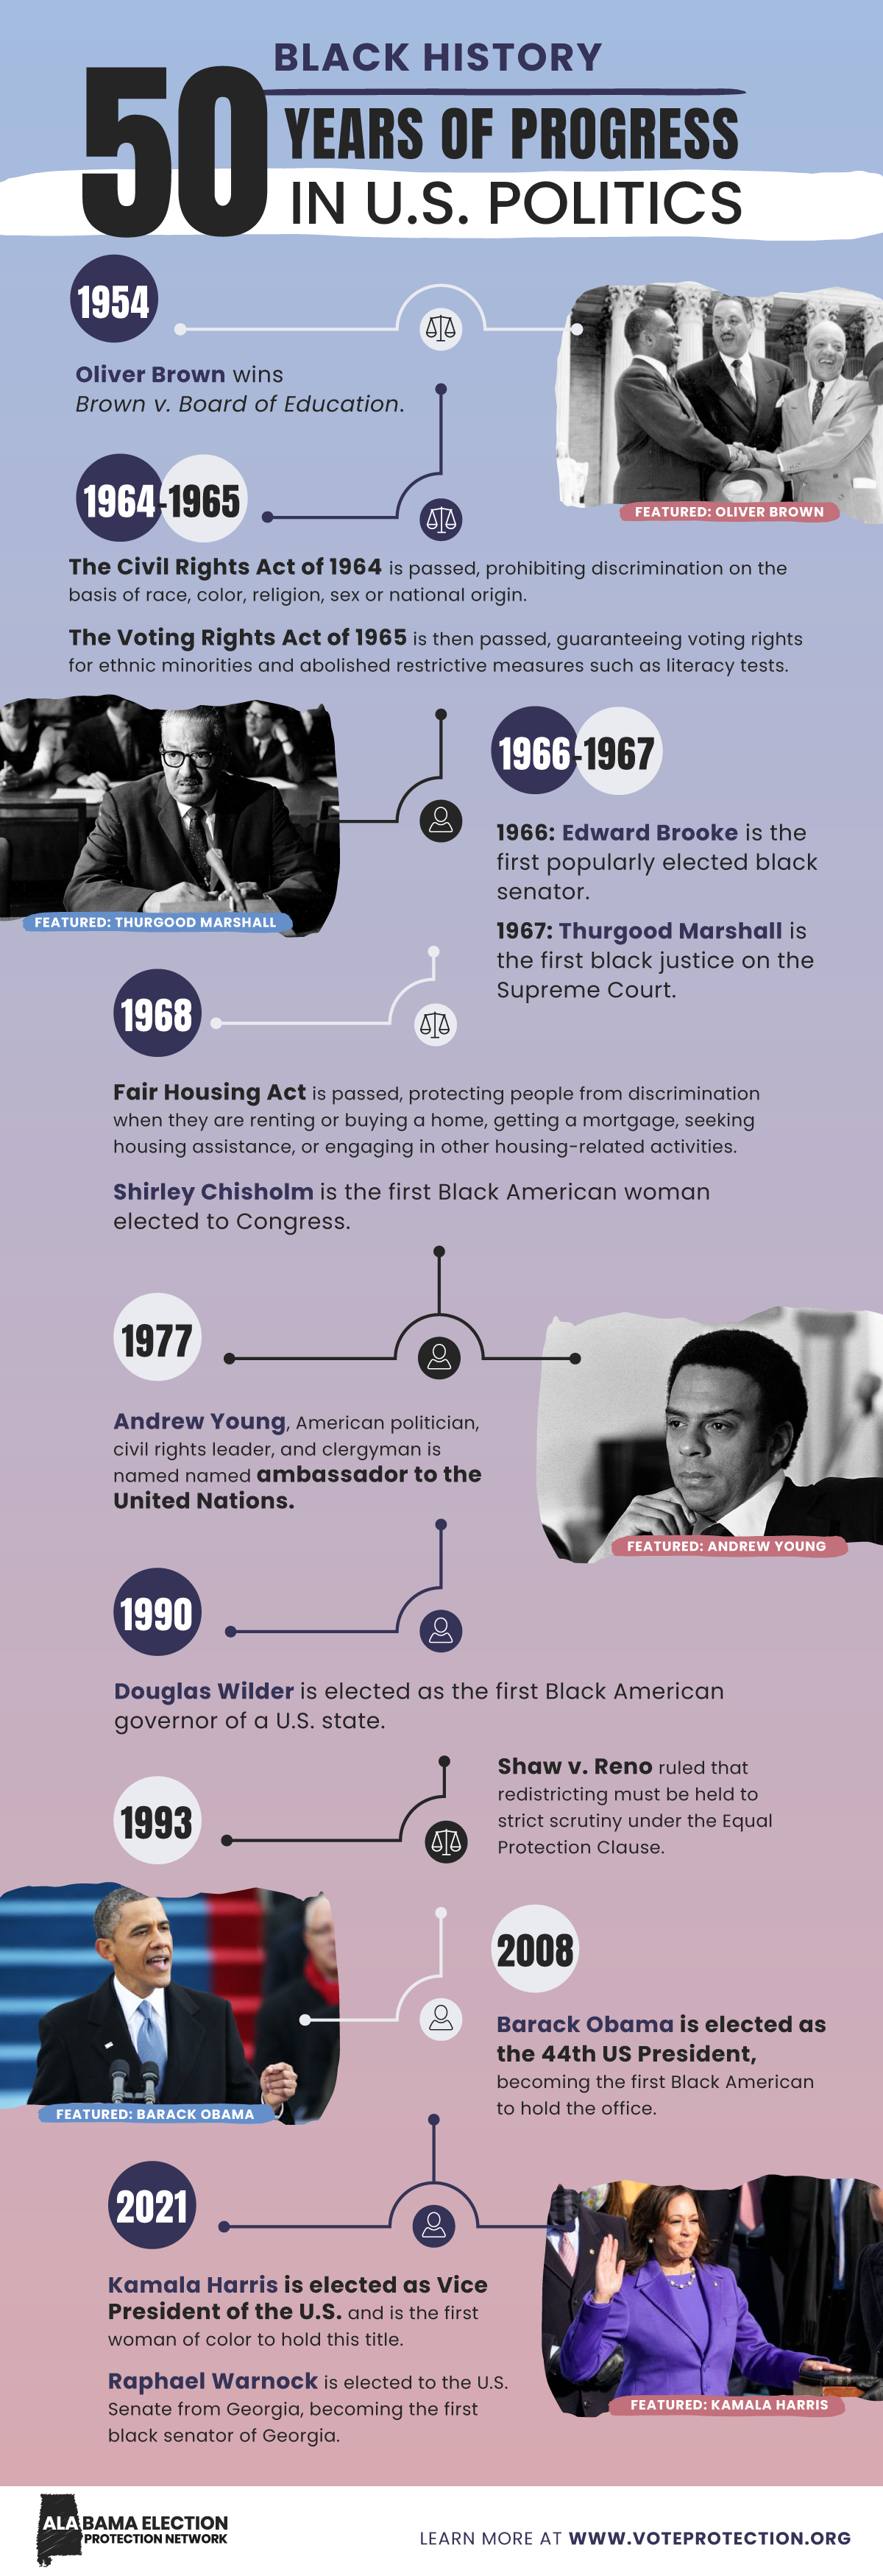 An infographic of 50 years of Black history in the United States of America.